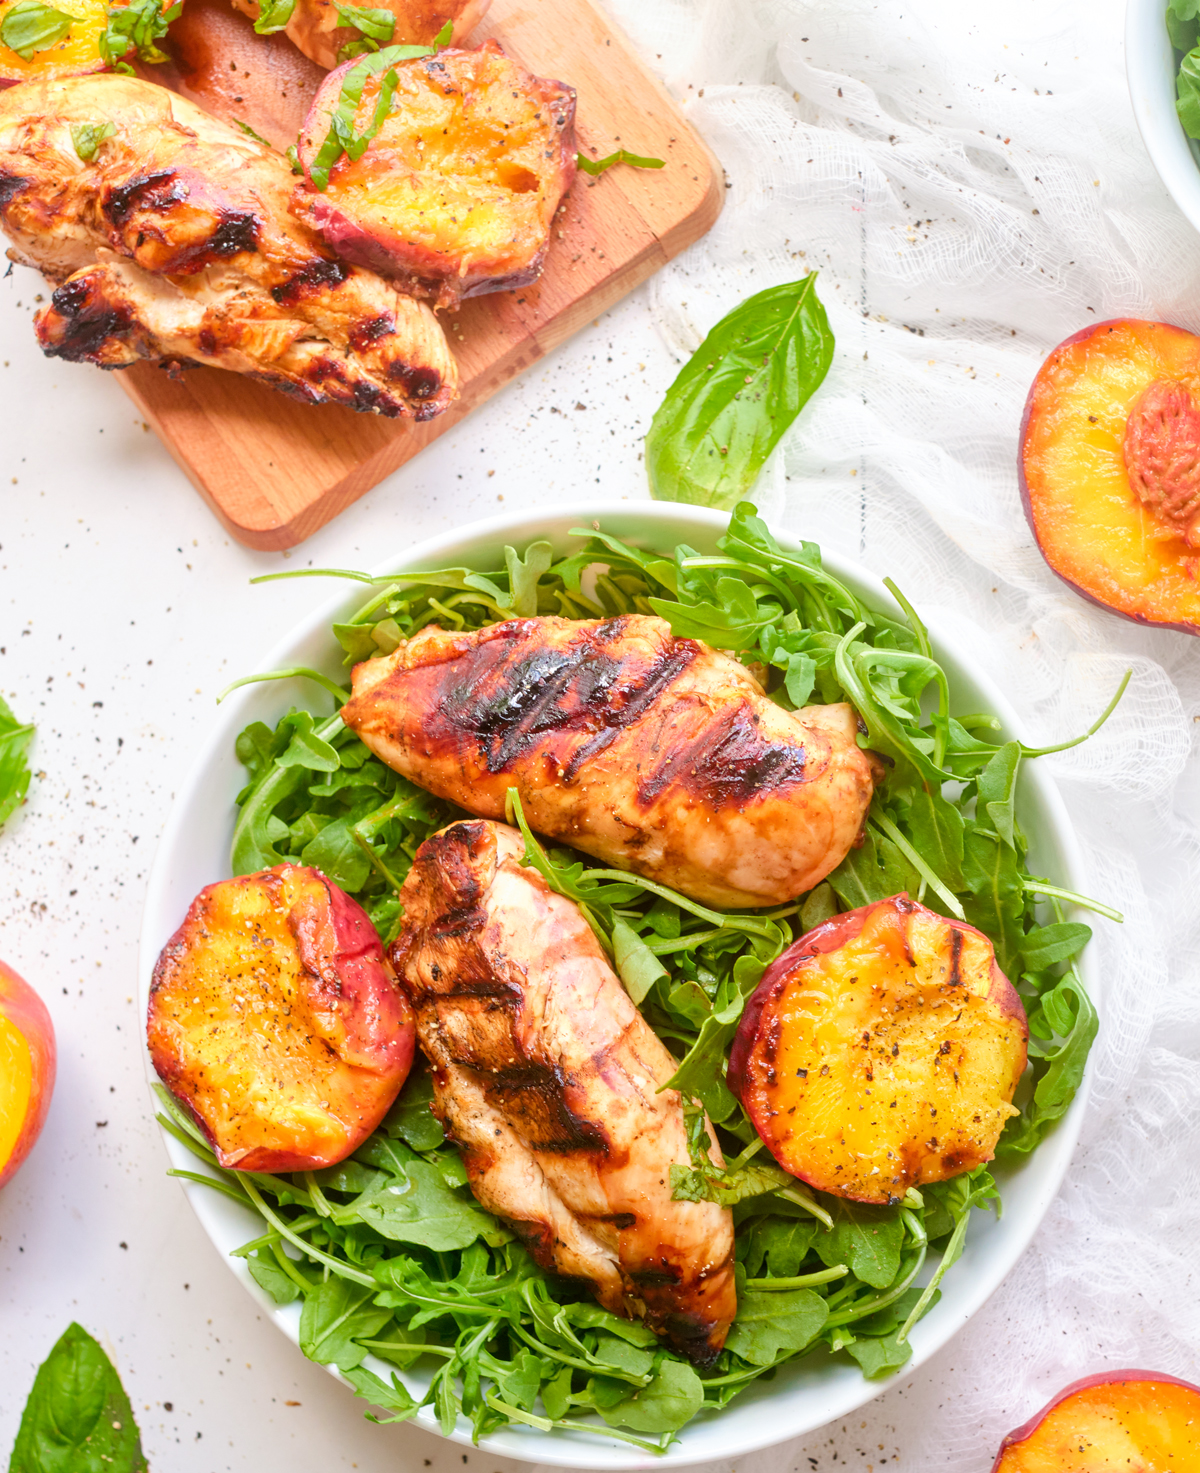 grilled balsamic chicken and peaches on arugula